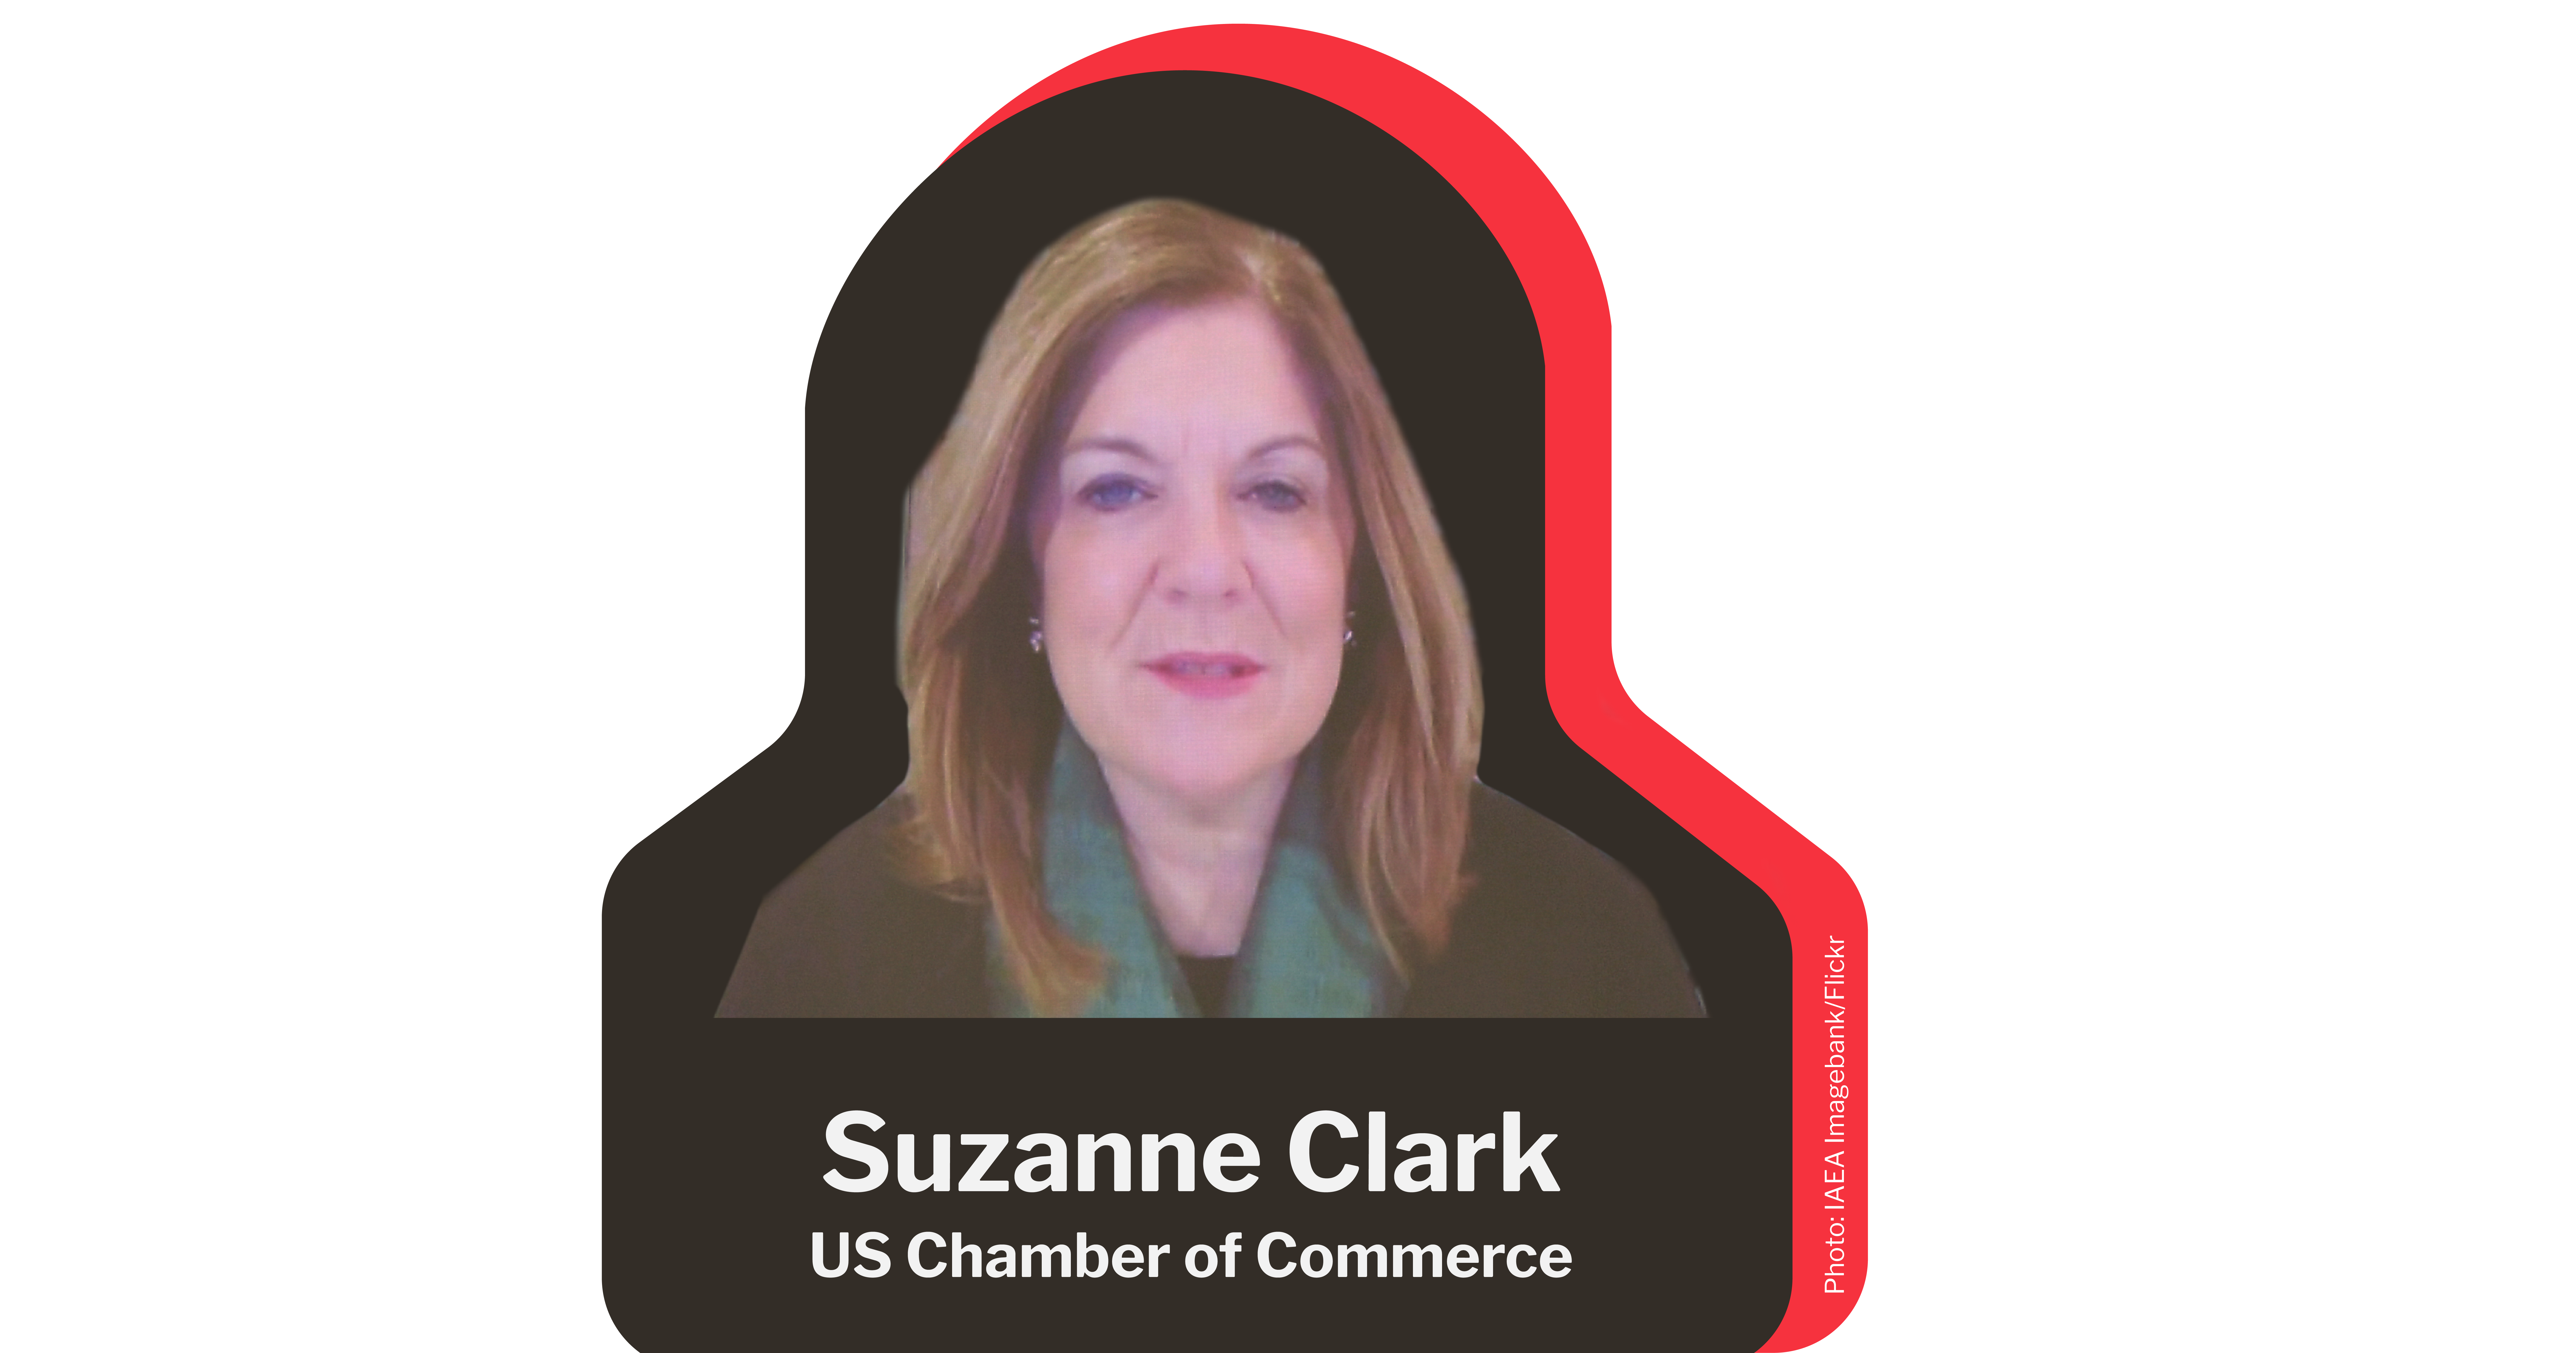 U.S. Chamber of Commerce President and CEO Suzanne Clark